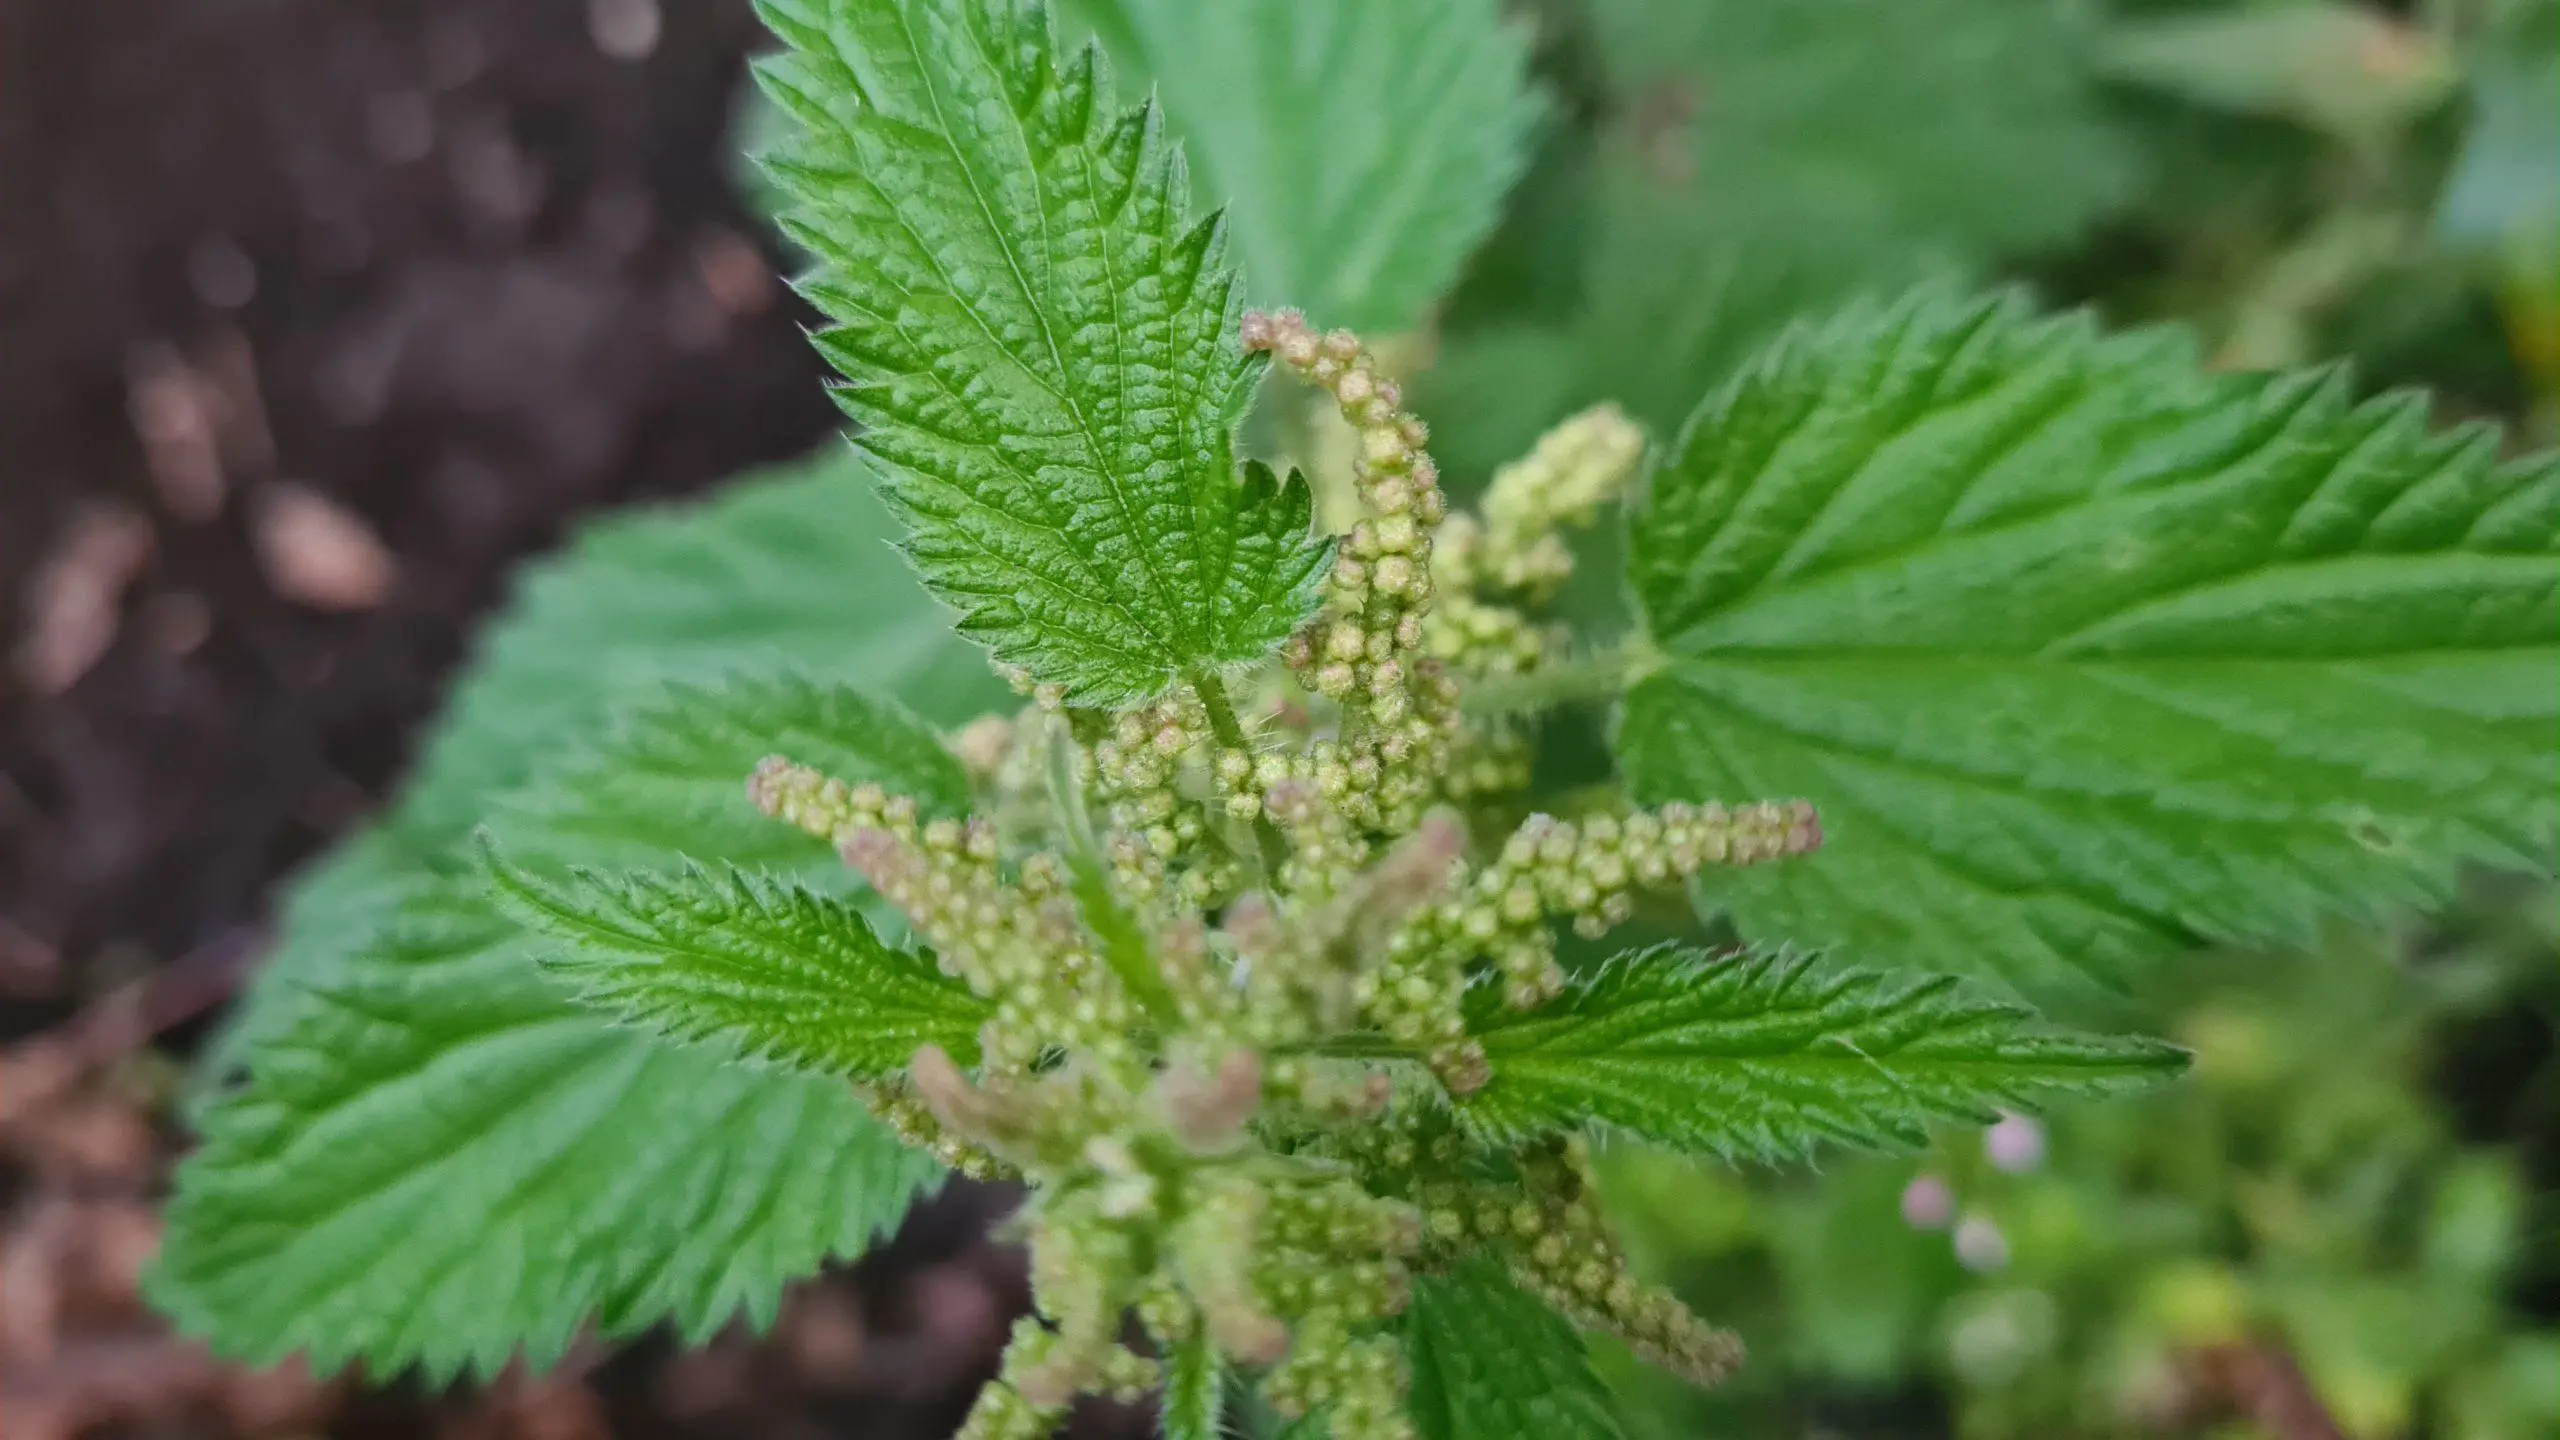 Stinging nettles seeds ready to spawn - Get Rid of Stinging Nettles